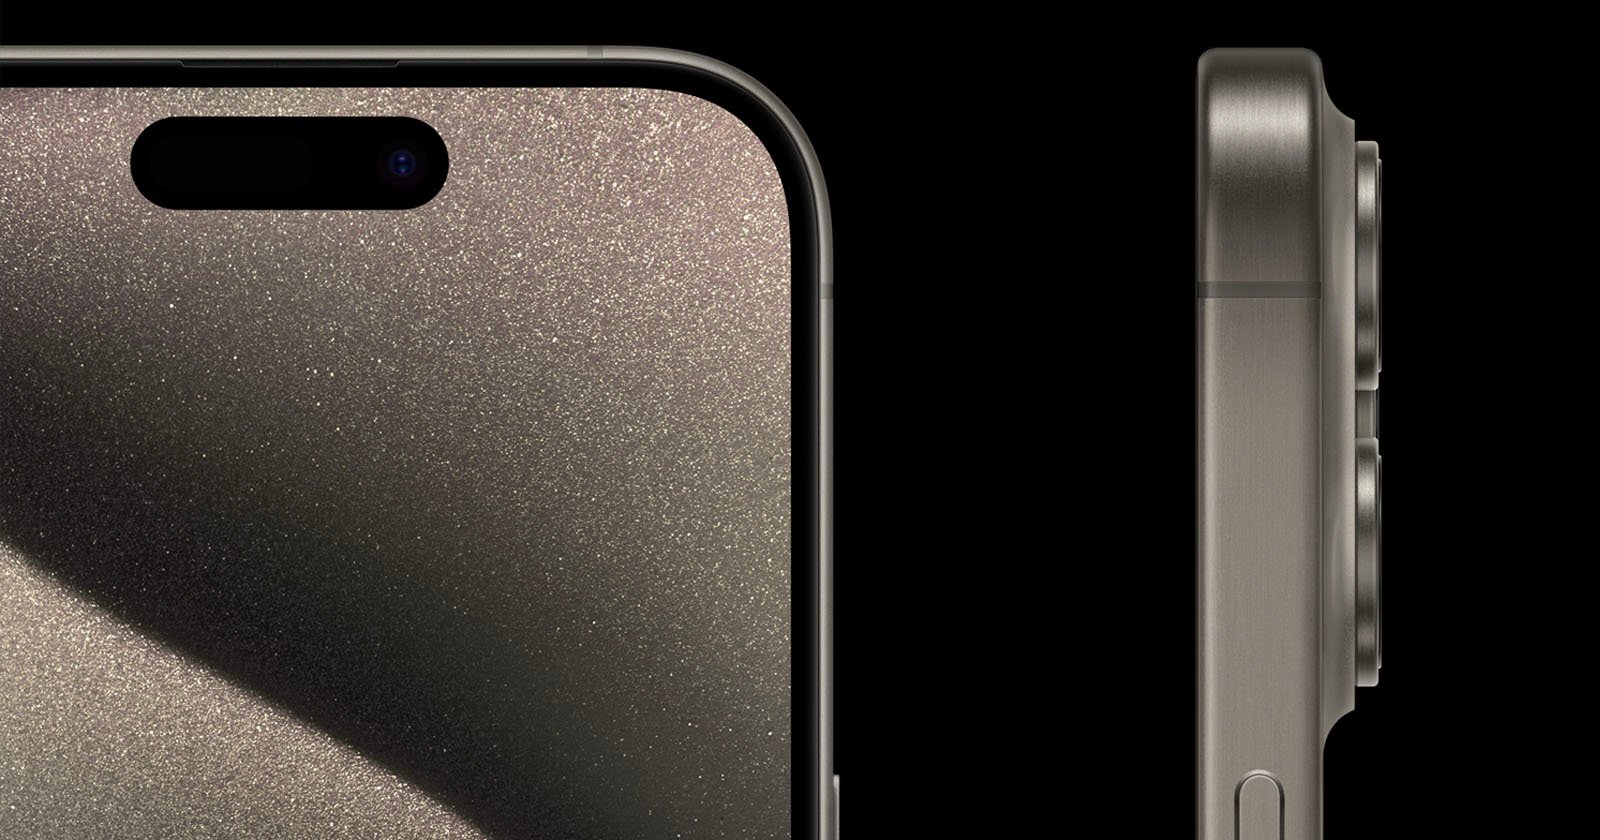 Apple rides a delicate line with its iPhone camera system. On the one hand, it wants to keep it as simple as possible to keep photographers “in 